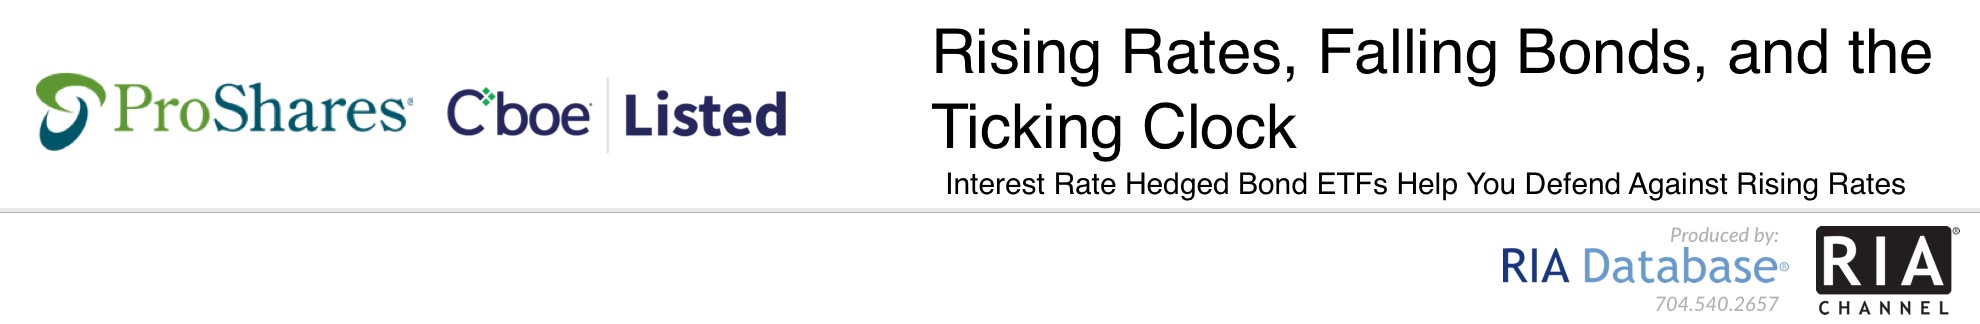 Rising Rates, Falling Bonds, and the Ticking Clock - ProShares